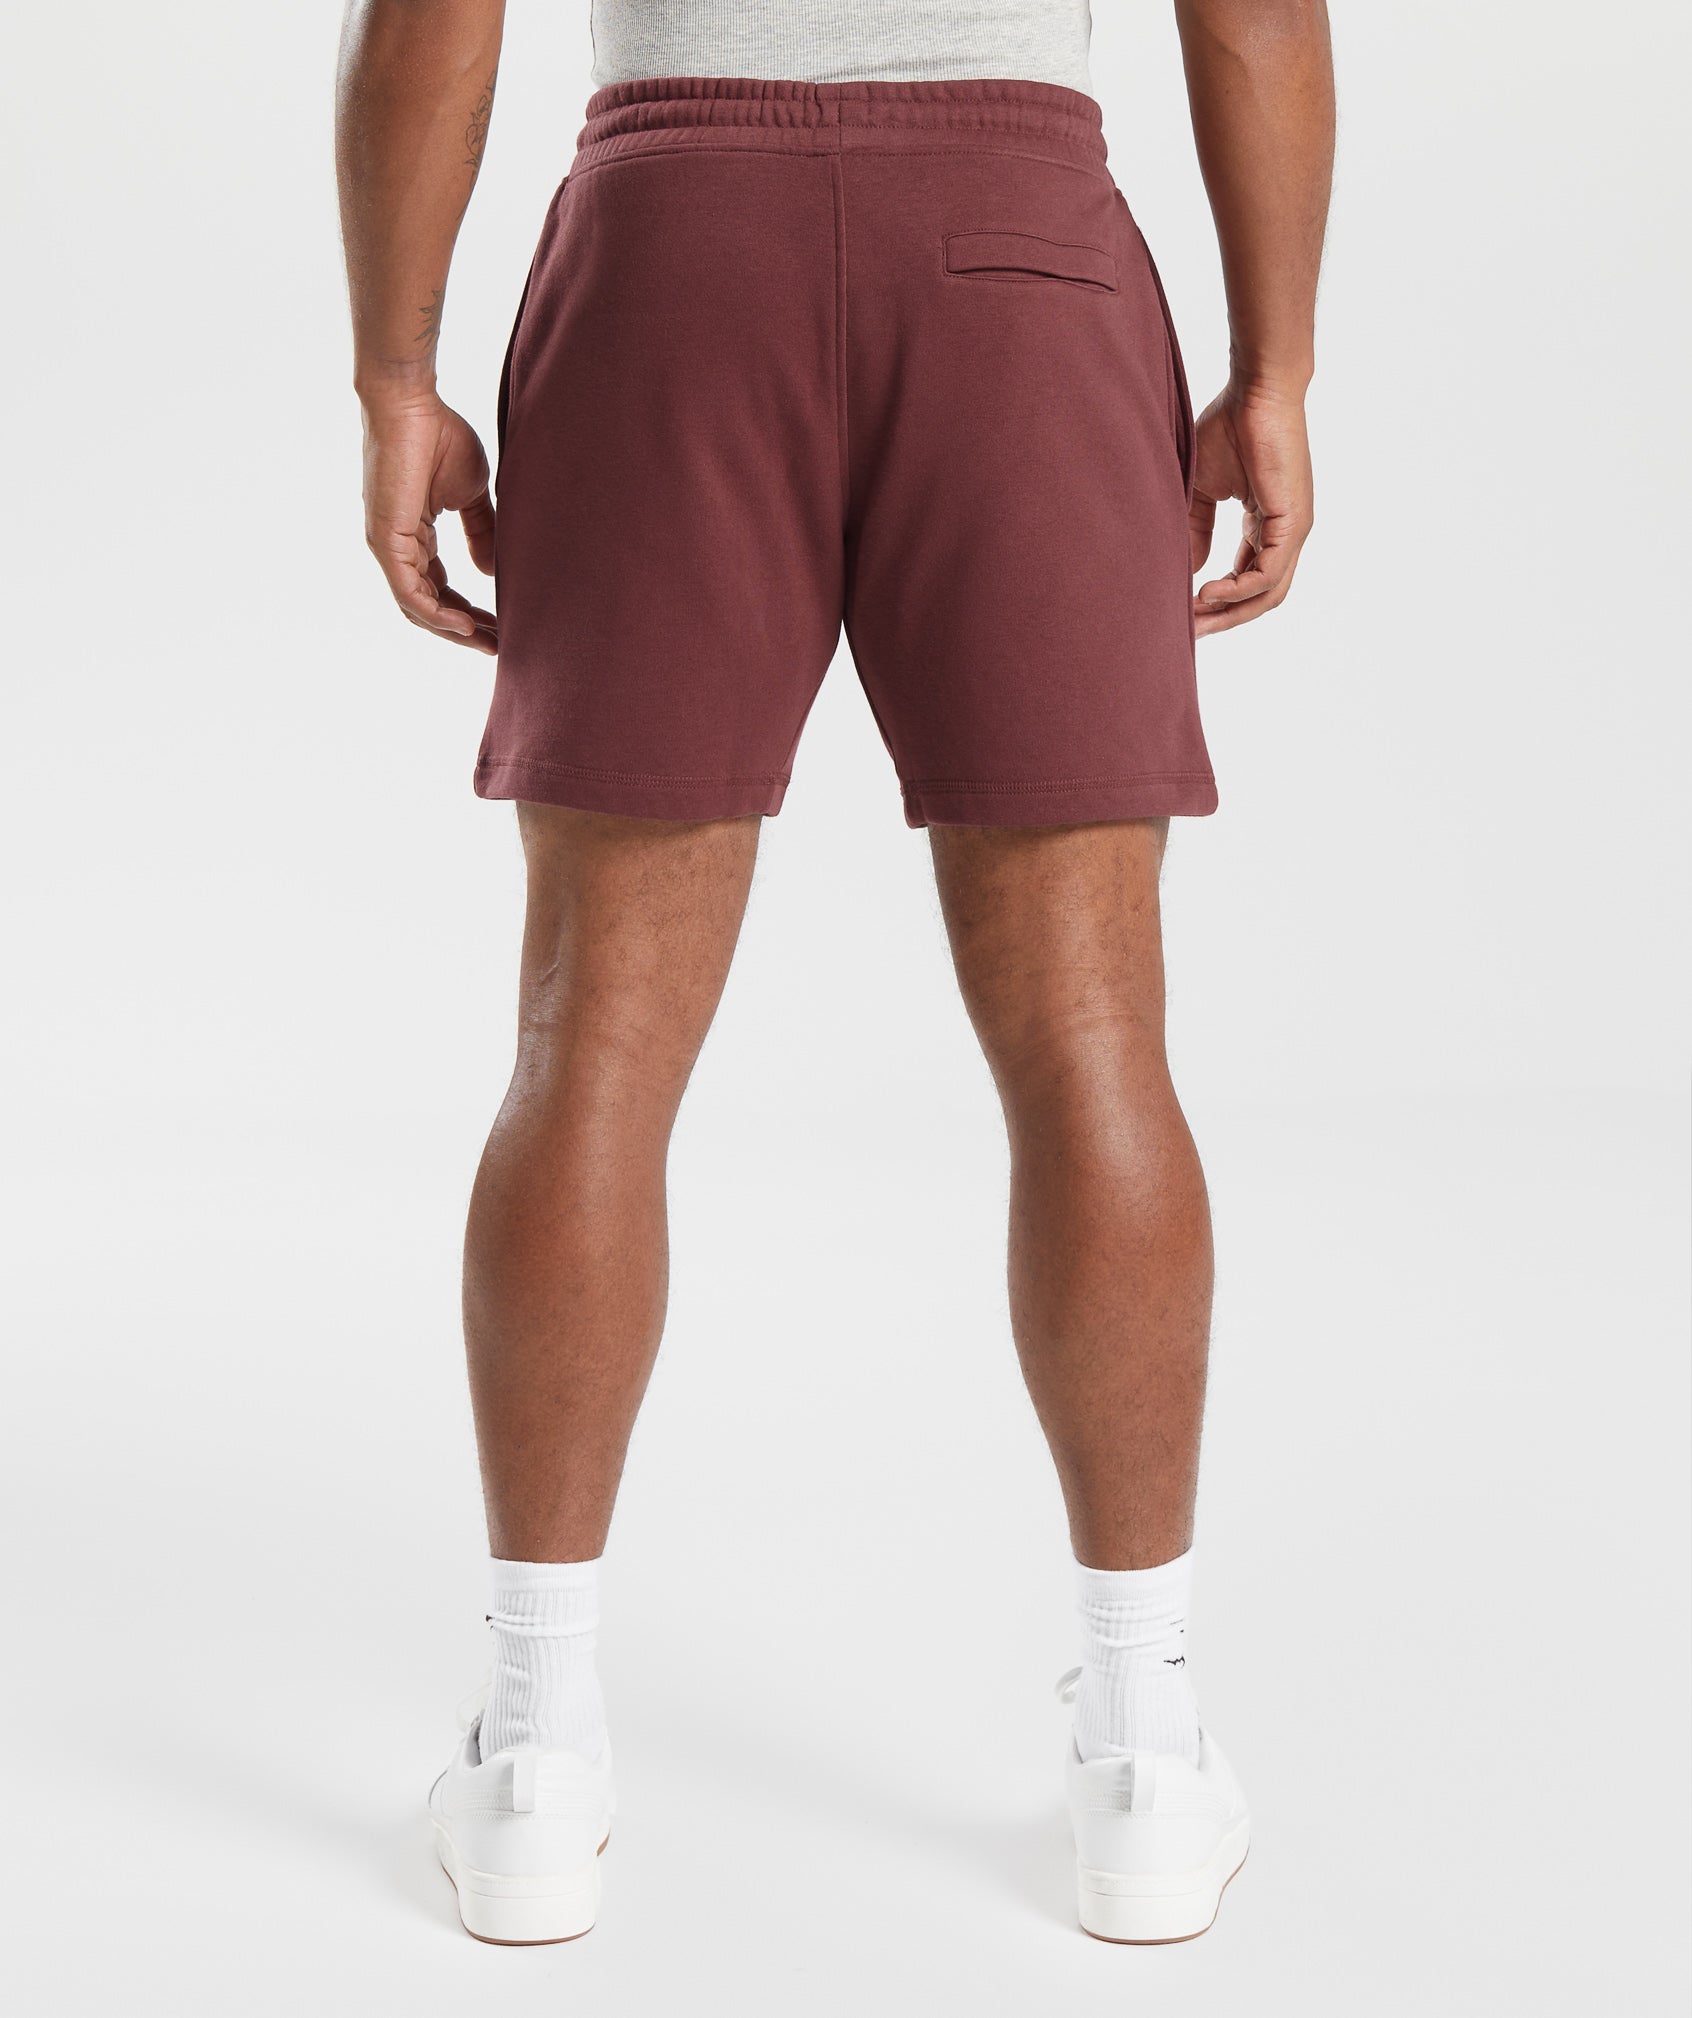 Crest 7" Shorts in Washed Burgundy - view 2